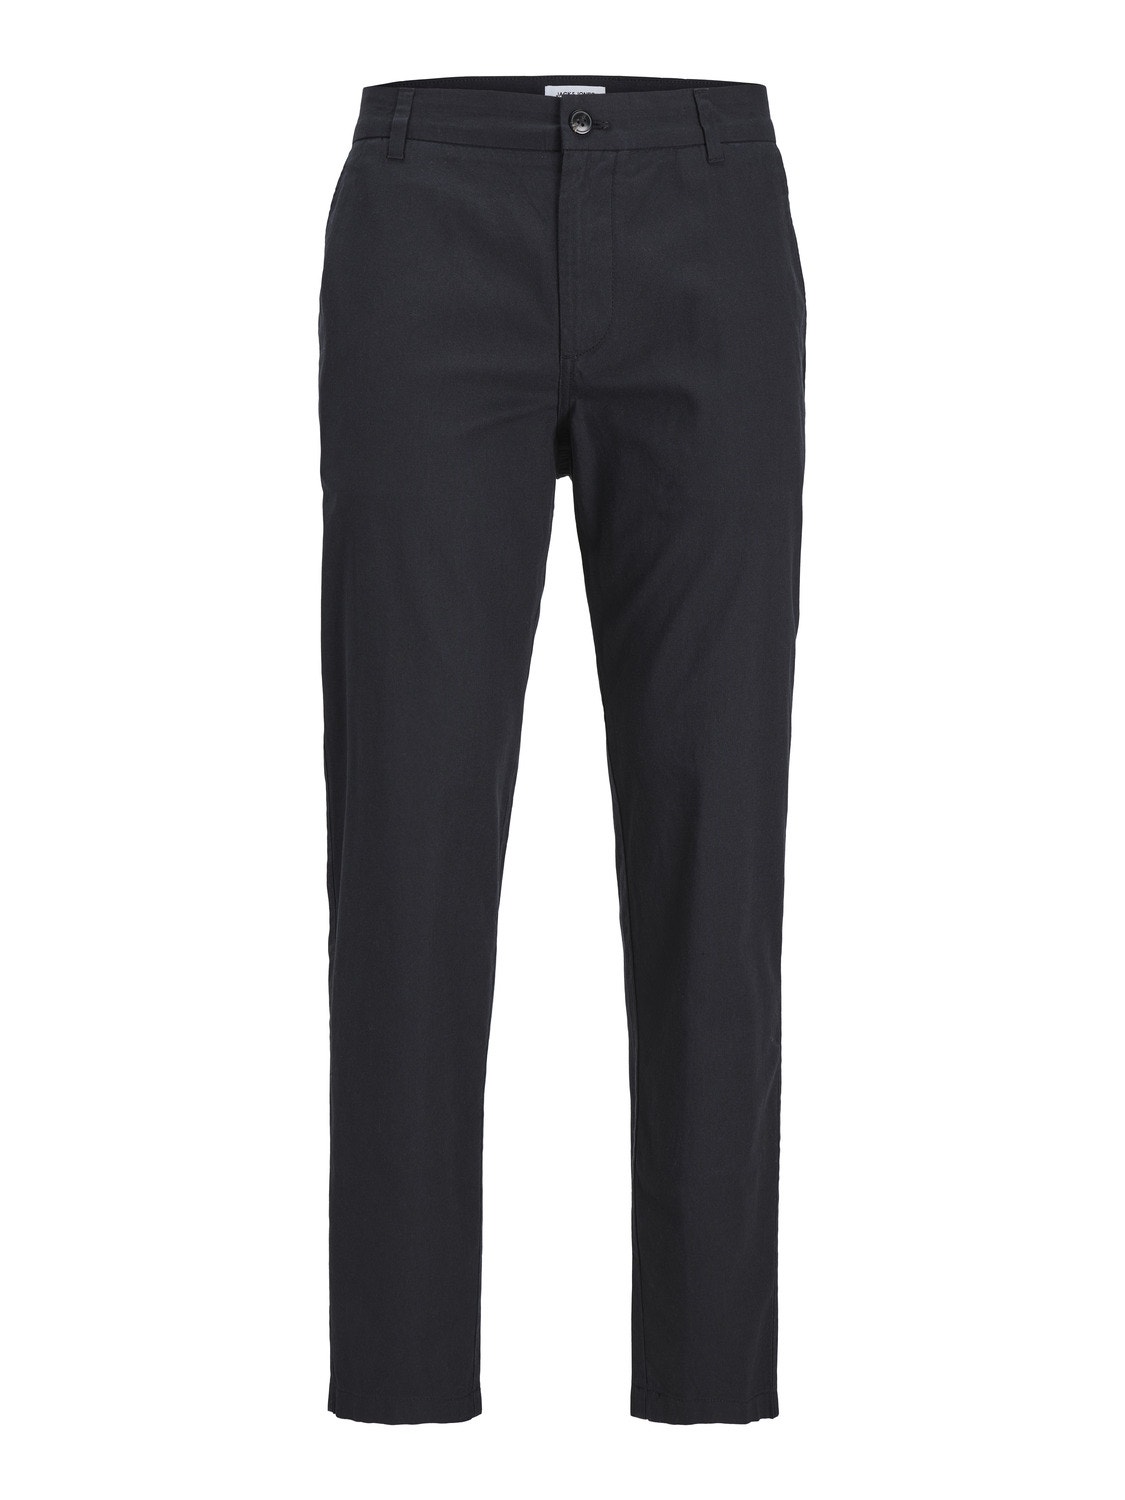 Jack & Jones Tapered Fit Chino trousers -Black - 12248604